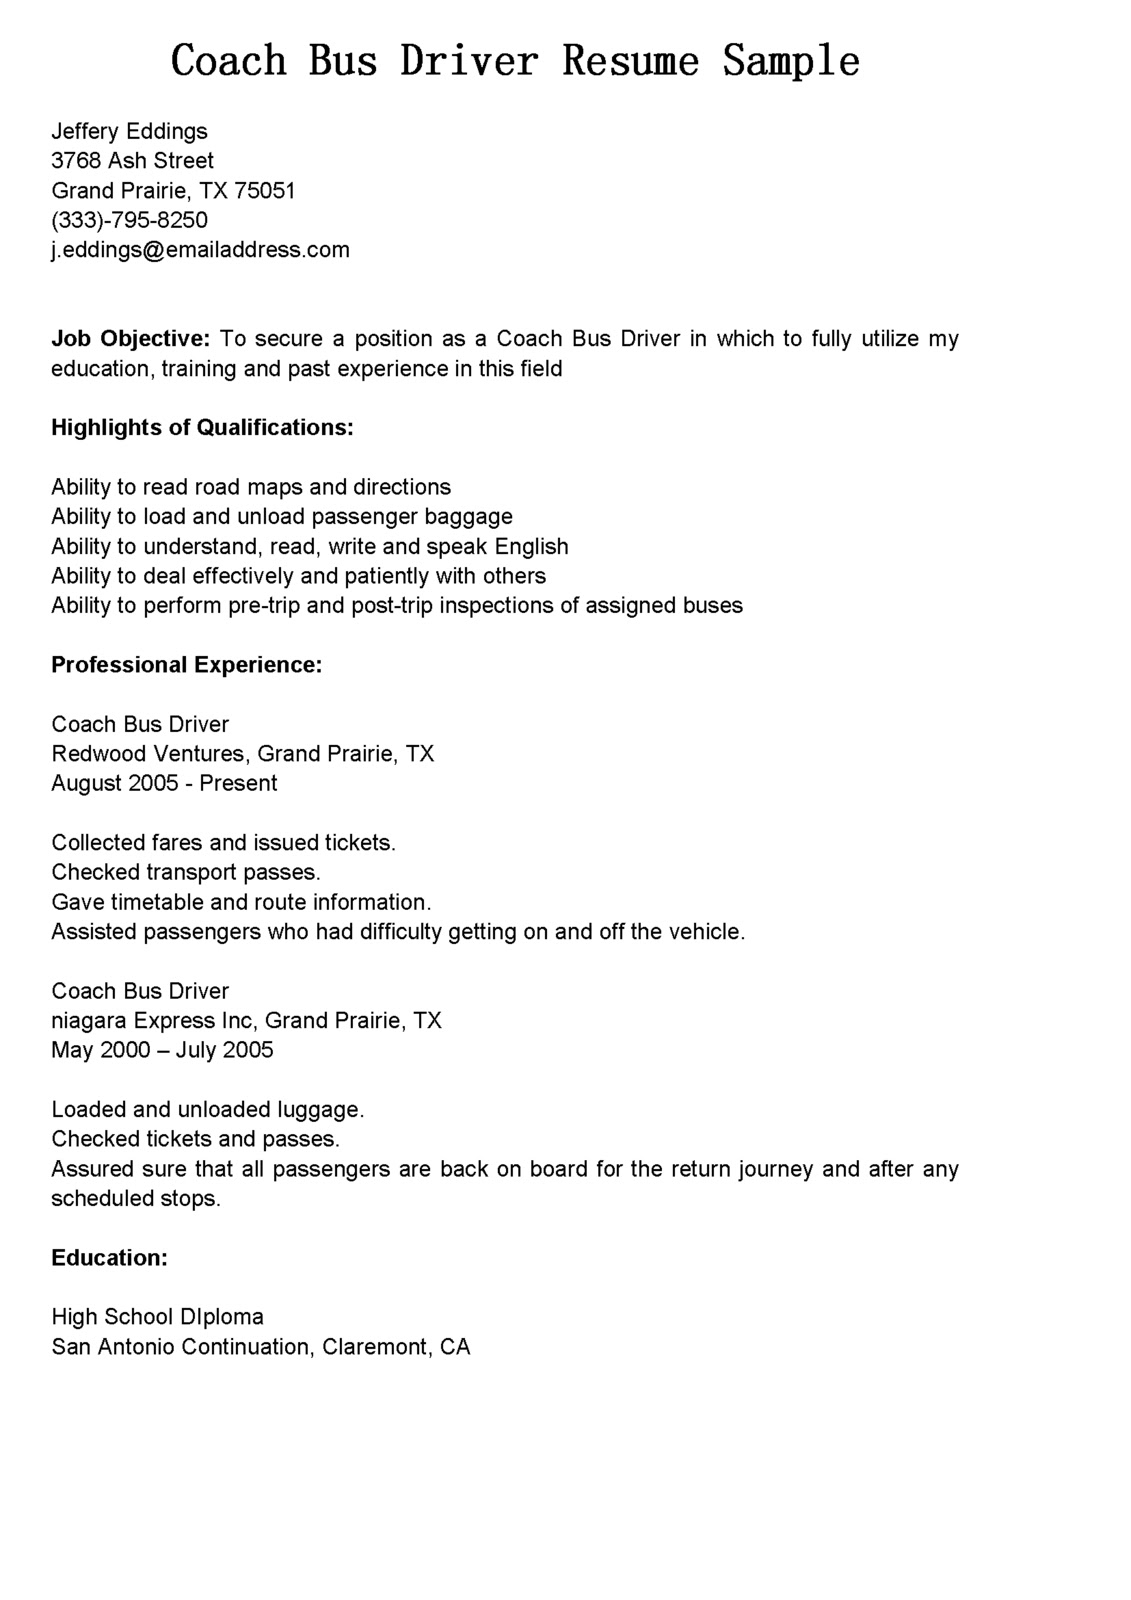 Resume for armored car driver